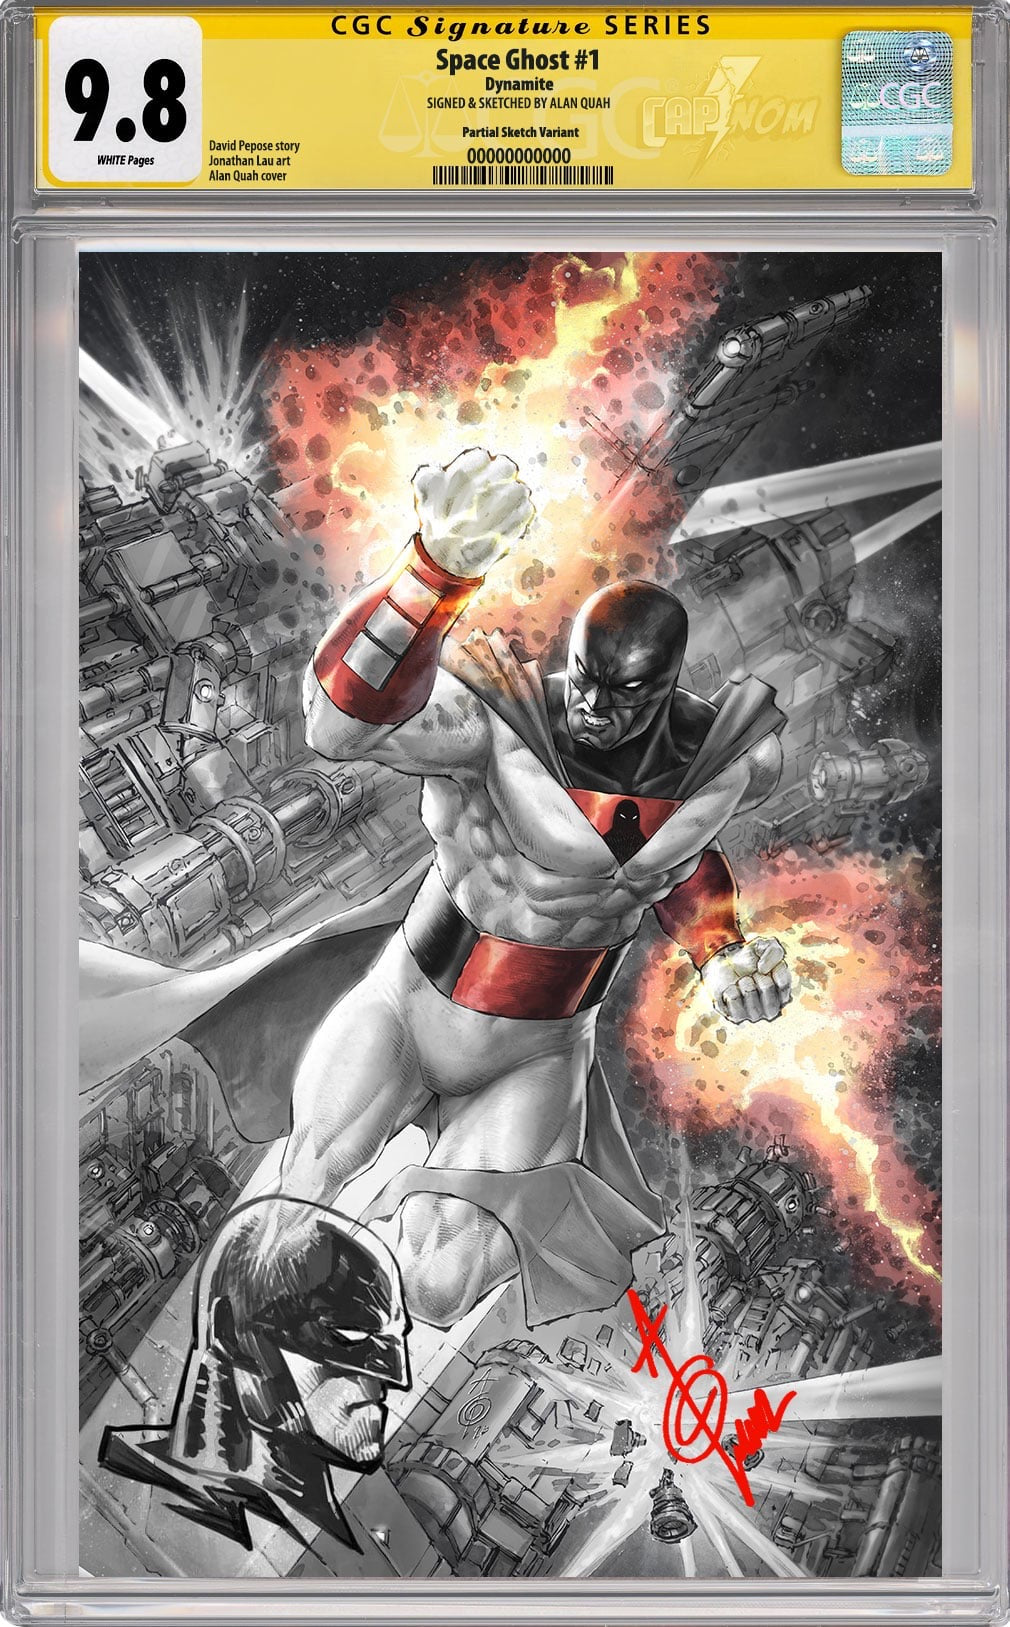 Space Ghost #1 Lake Como Exclusive Full Virgin Wraparound CGC SS 9.8 Signed & Remarked by Alan Quah